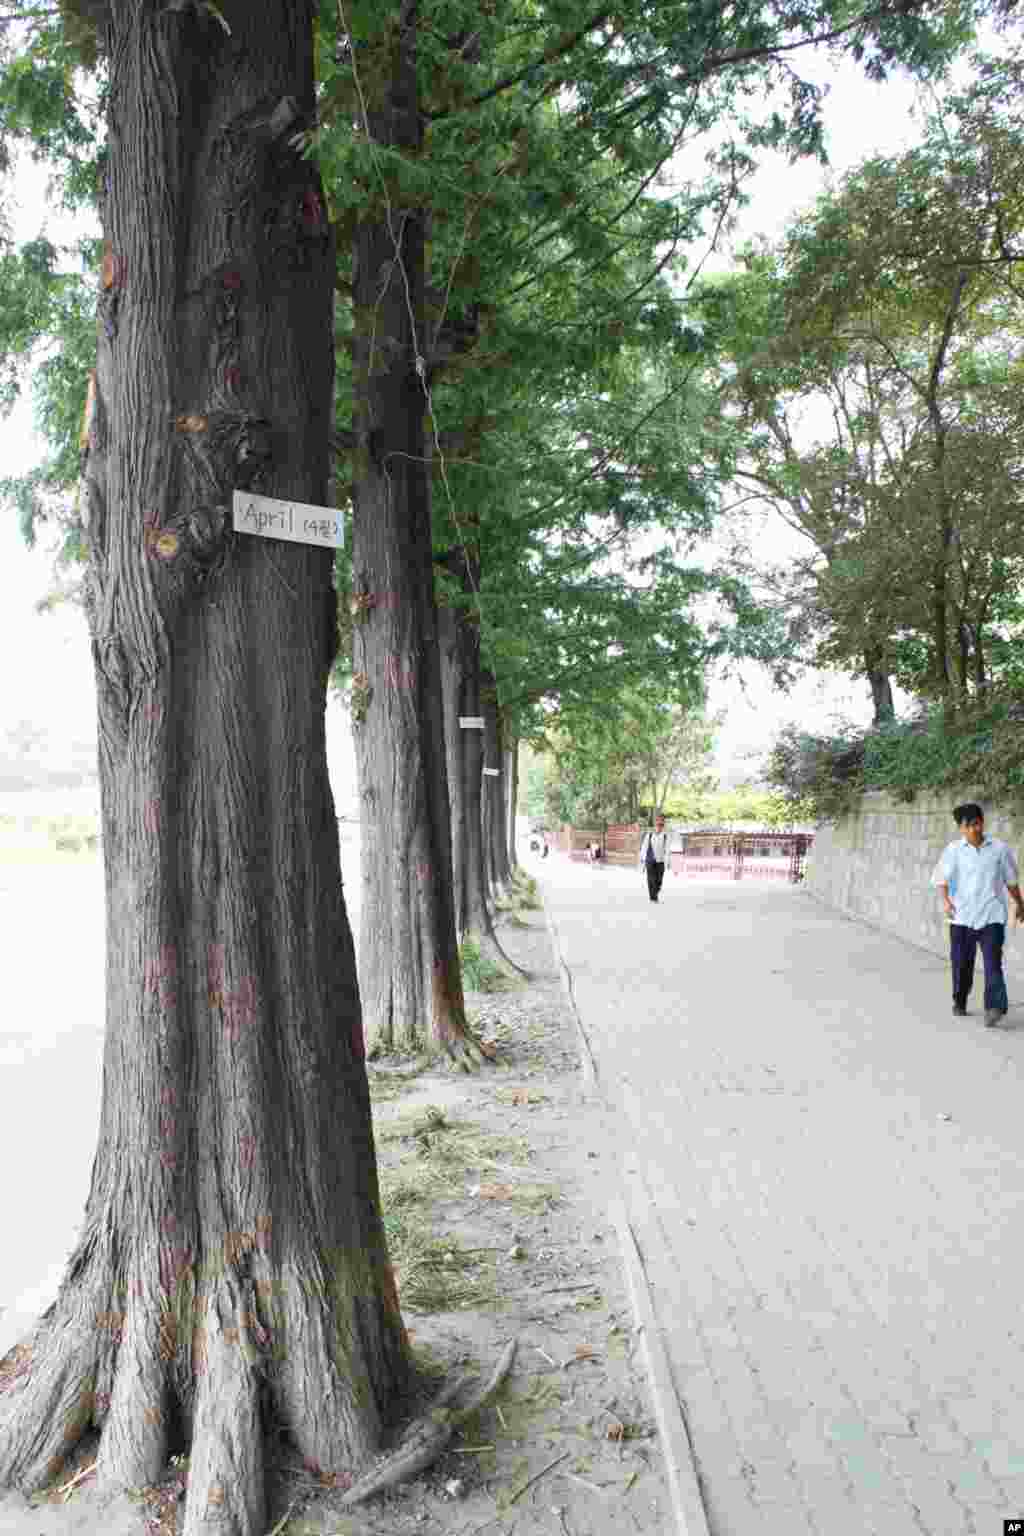 English language learning is booming among North Korean school children. An English word is posted on a street tree. (Sungwon Baik/VOA)